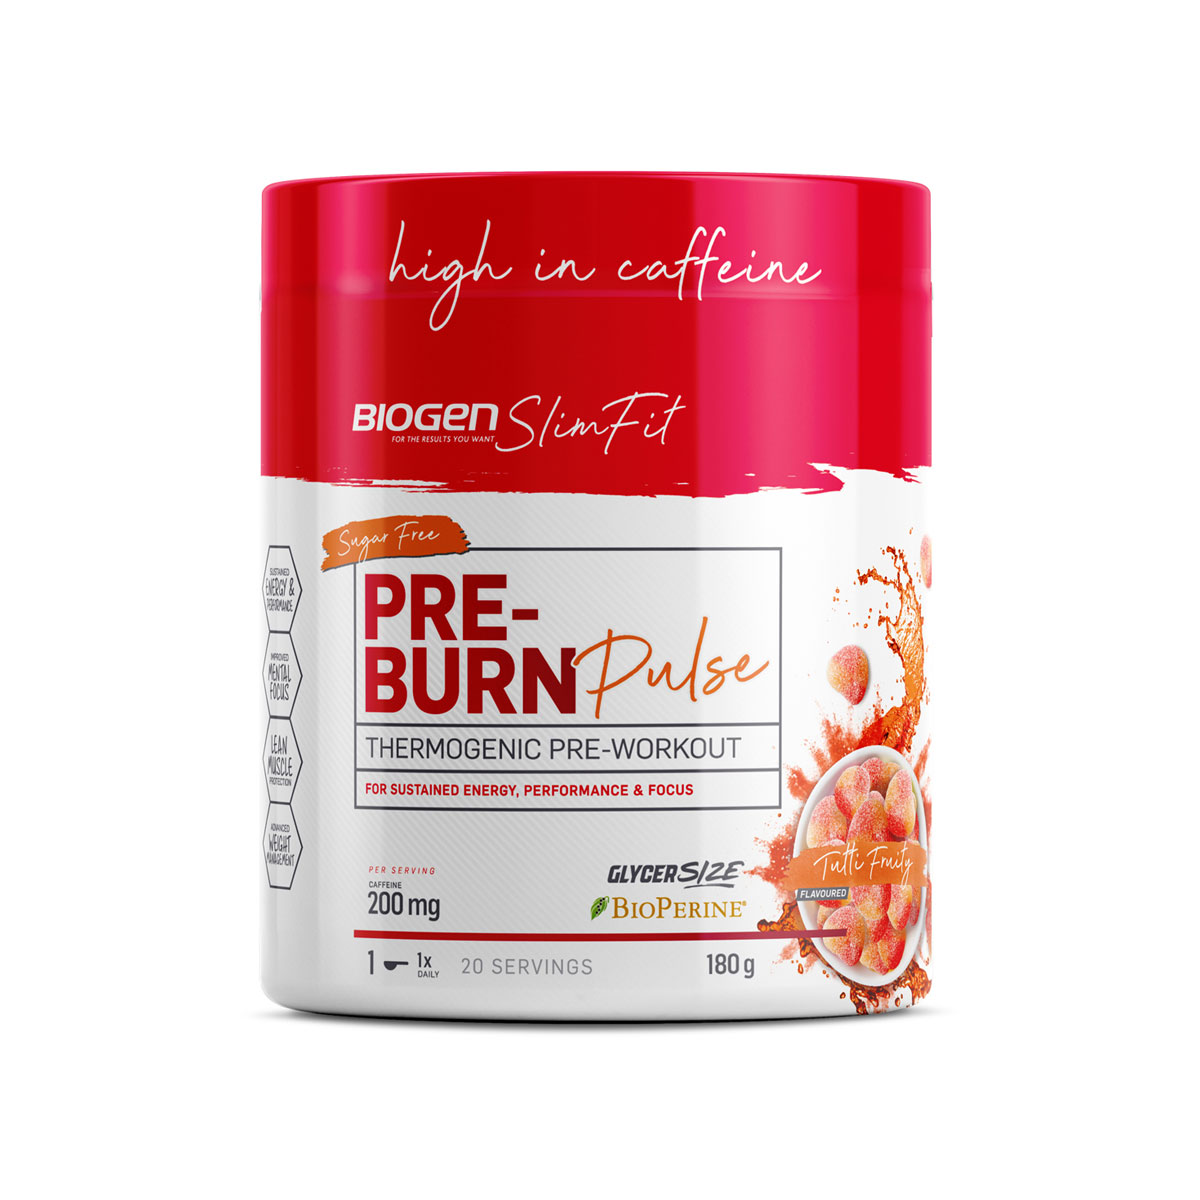 Pre-Burn Pulse Thermogenic Pre-Workout - 180g / Assorted